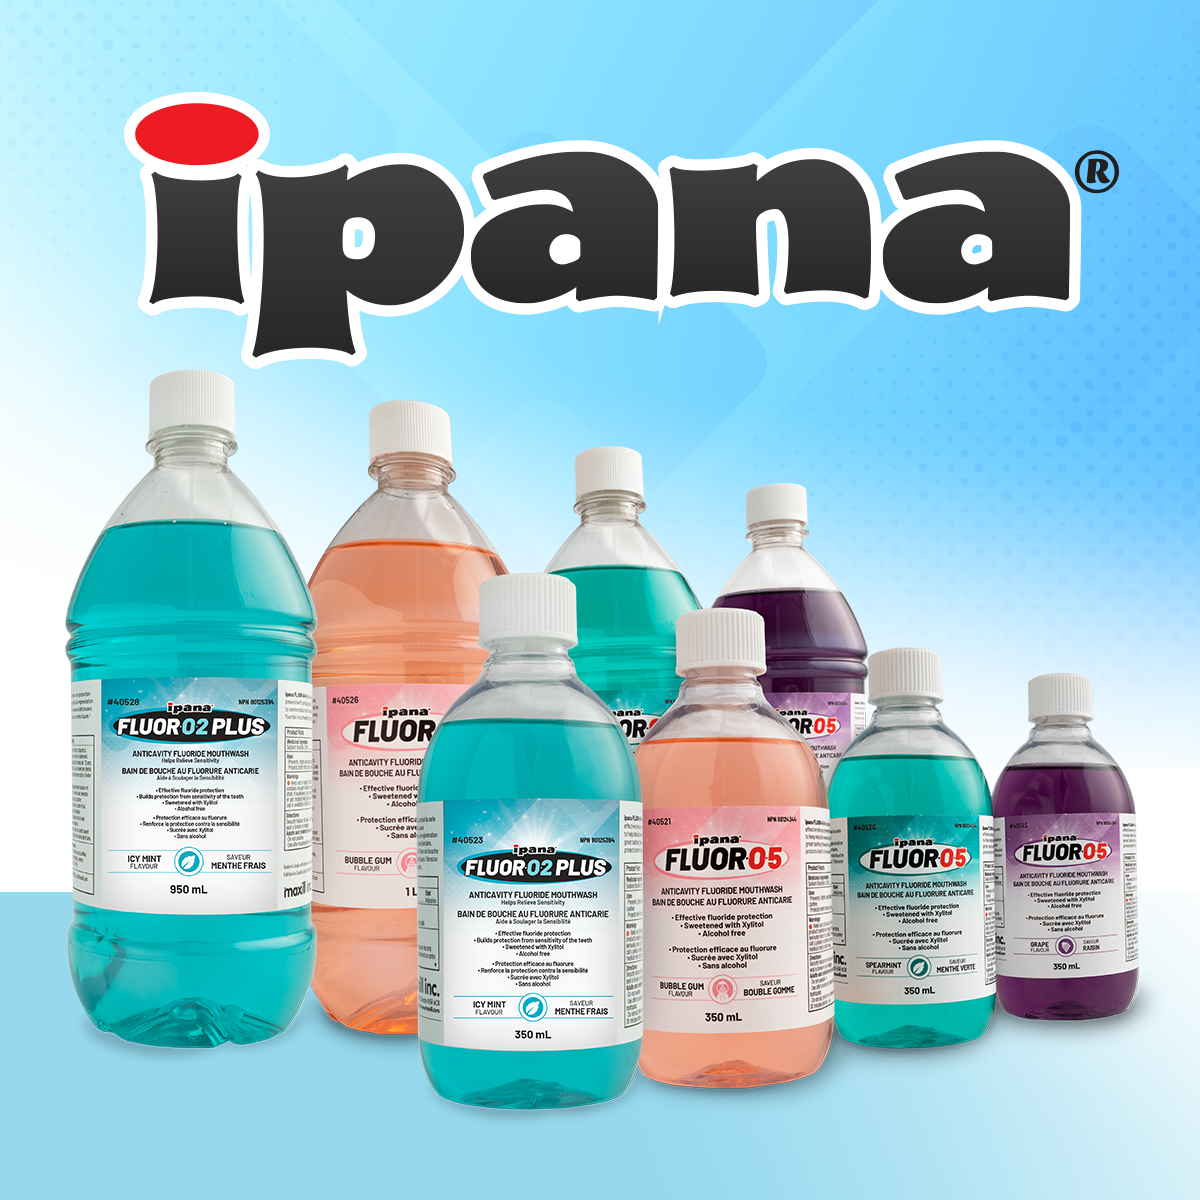 Elevate Your Oral Health with ipana's NEW Innovative Fluoride Mouthwashes